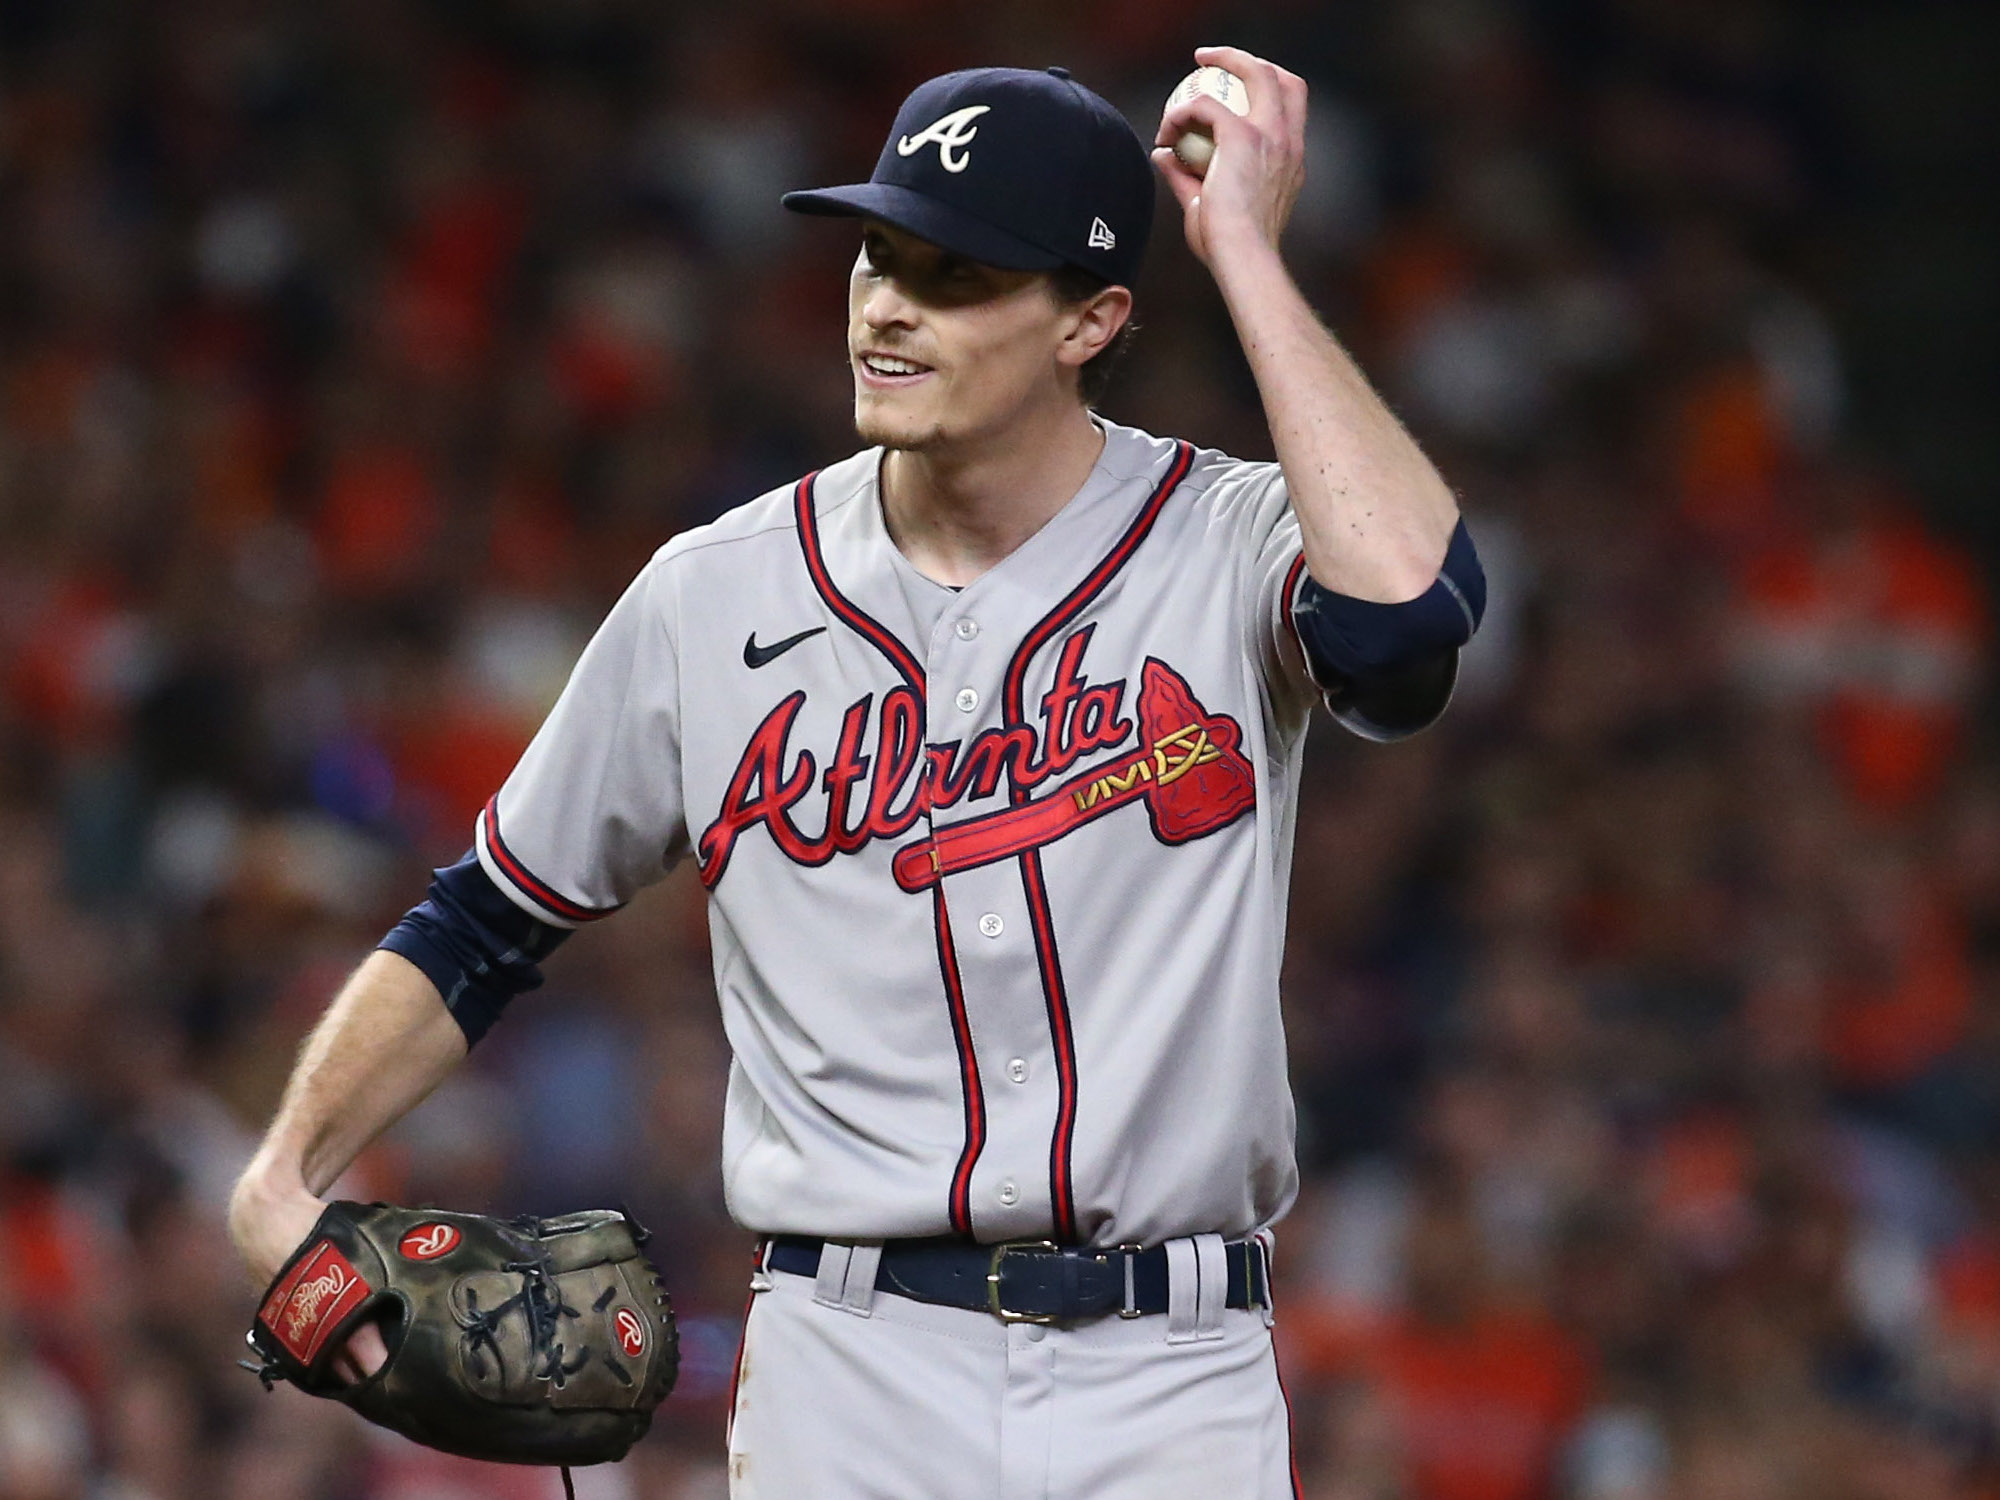 Braves lose ace Max Fried to worrying head injury